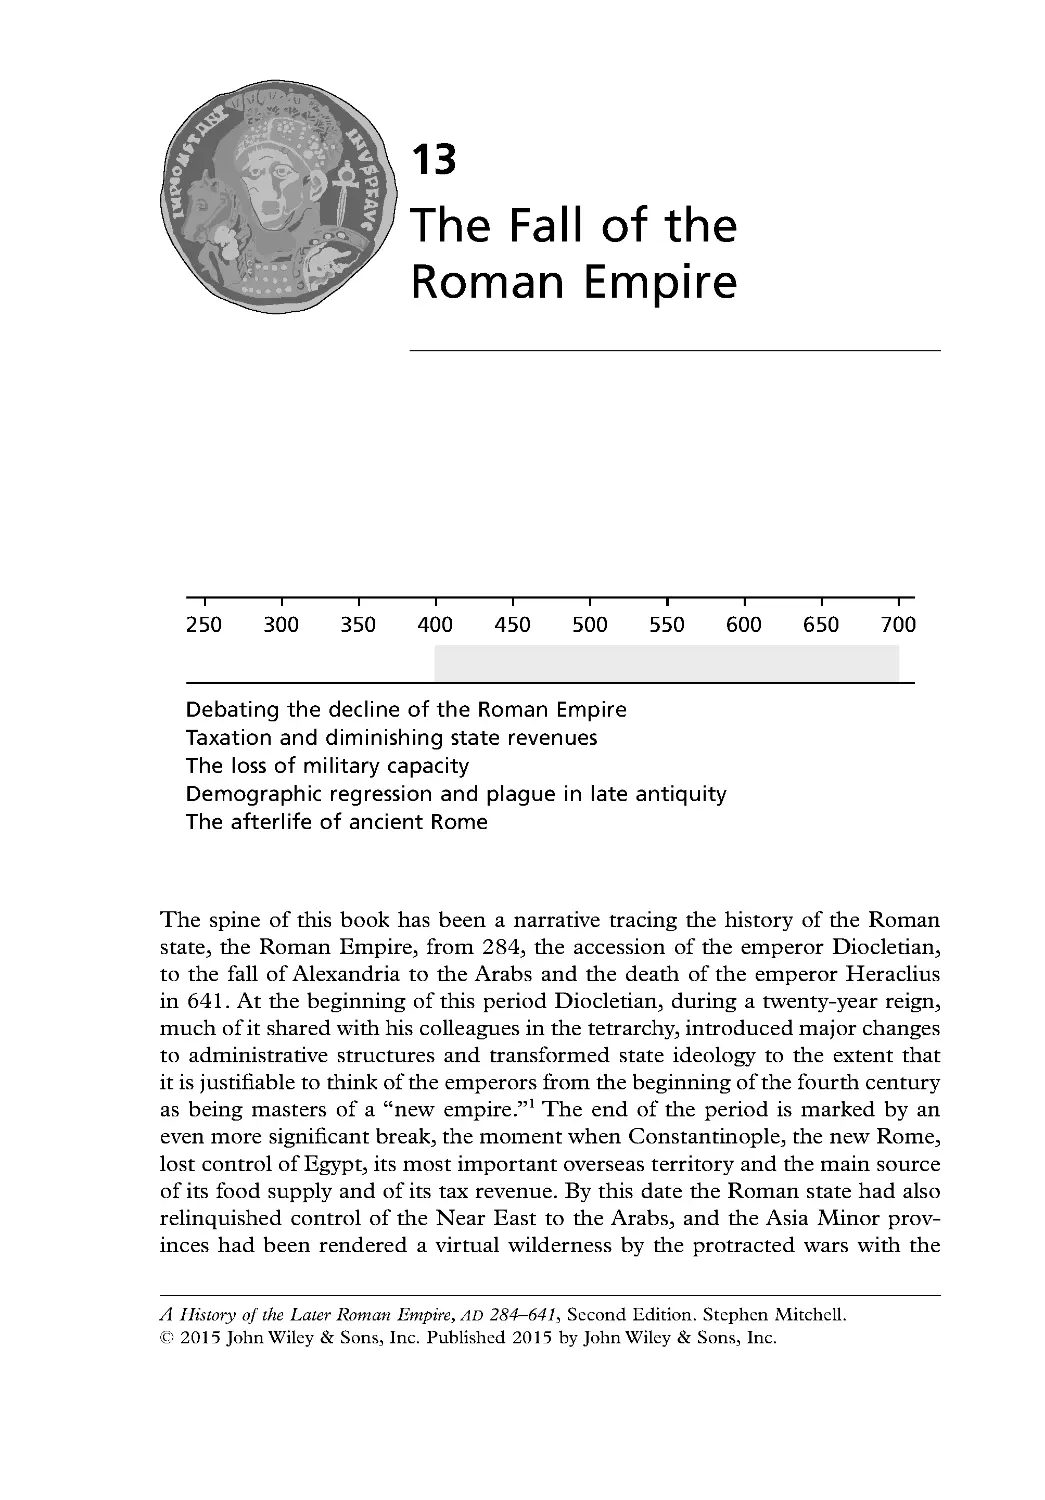 13: The Fall of the Roman Empire